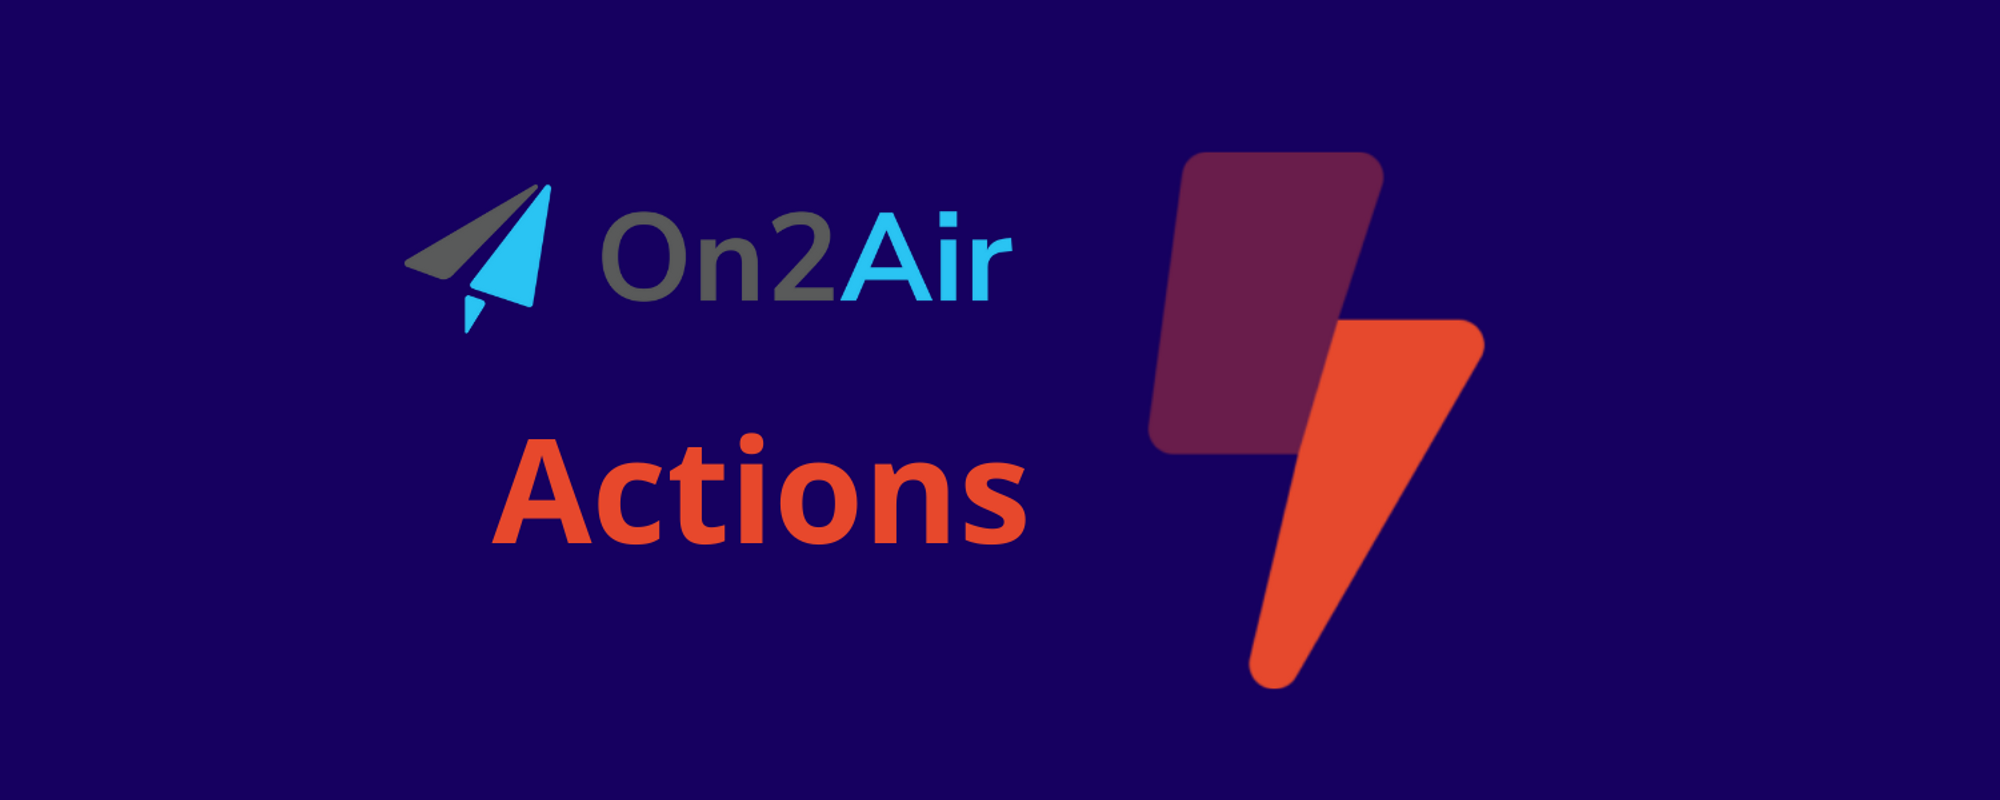 FAQ: On2Air Actions